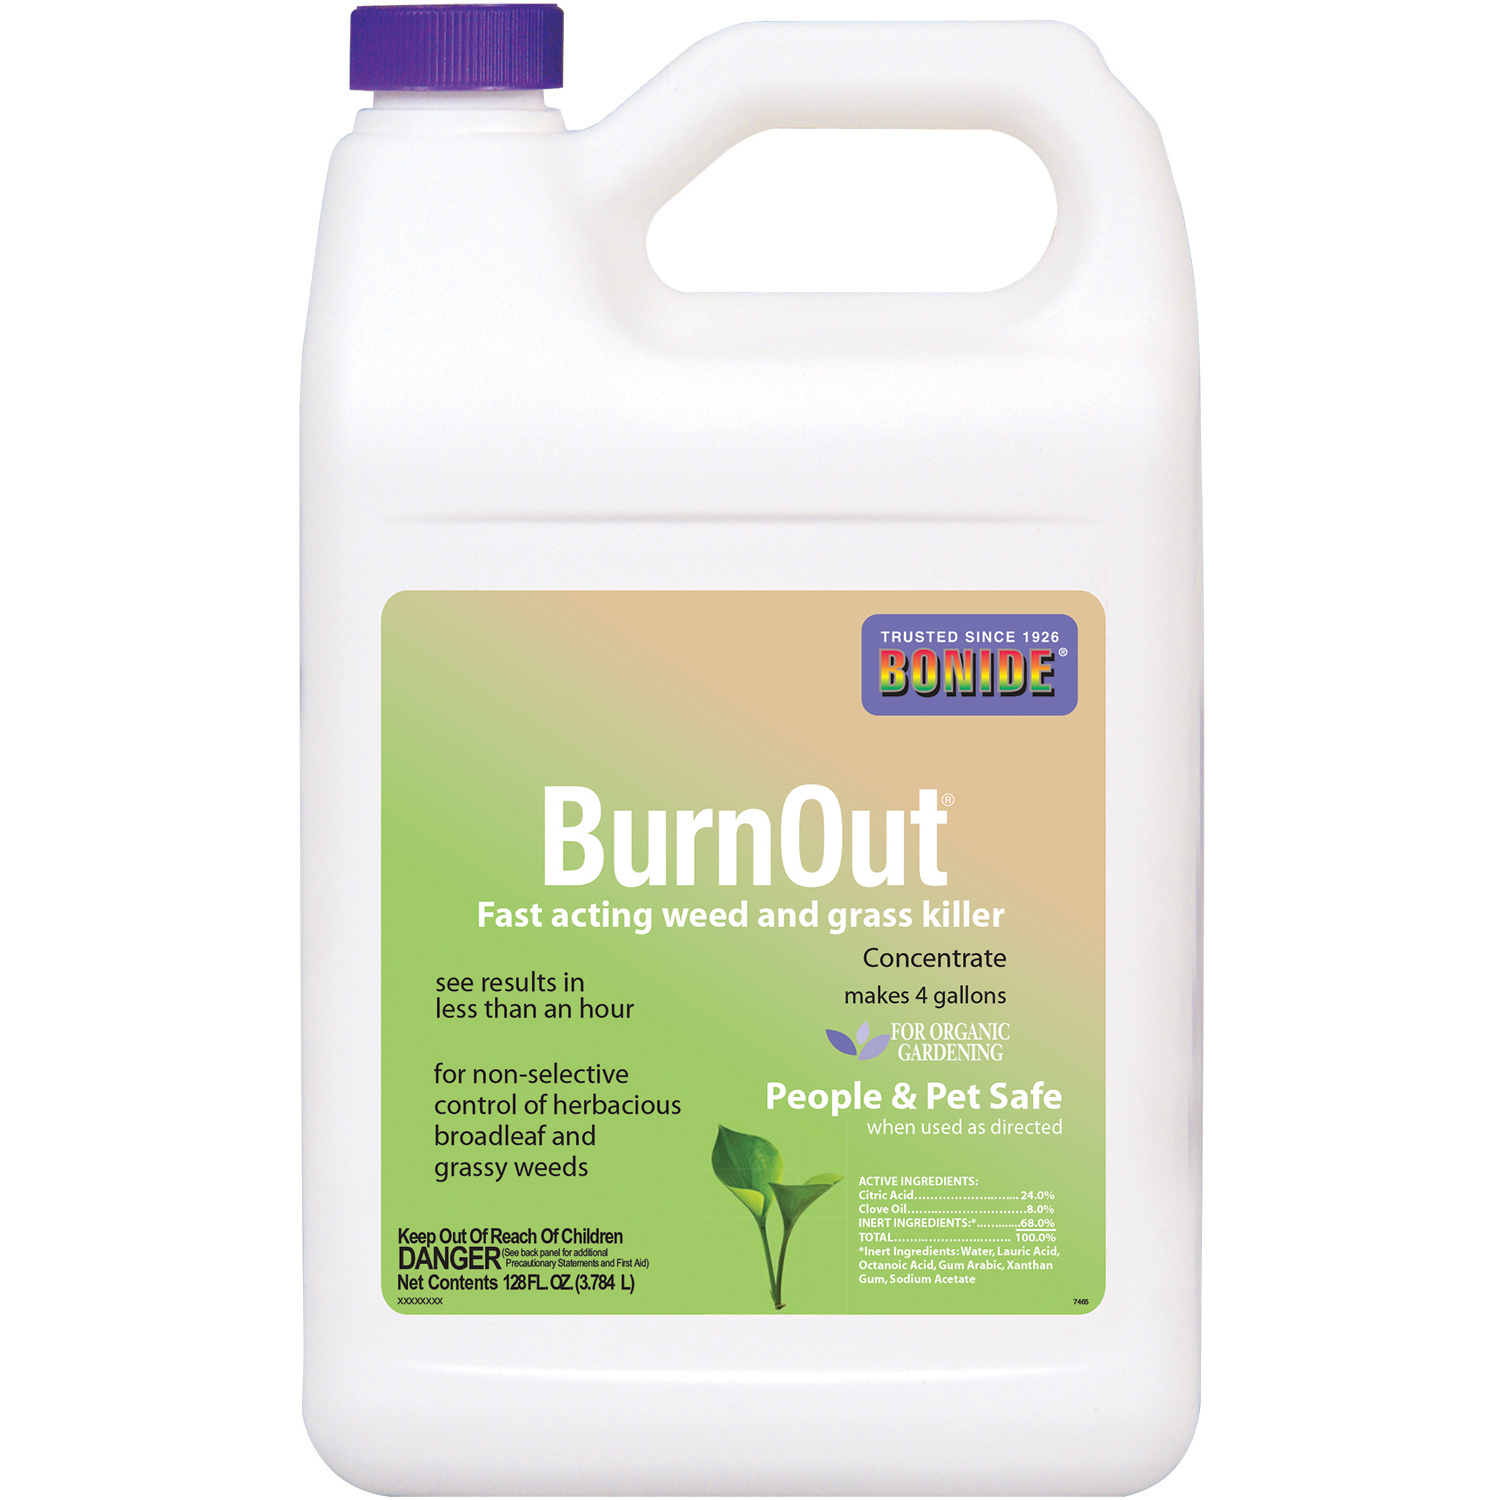 BND7465 Bonide Burn Out Weed & Grass Killer Concentrate, 1 gal